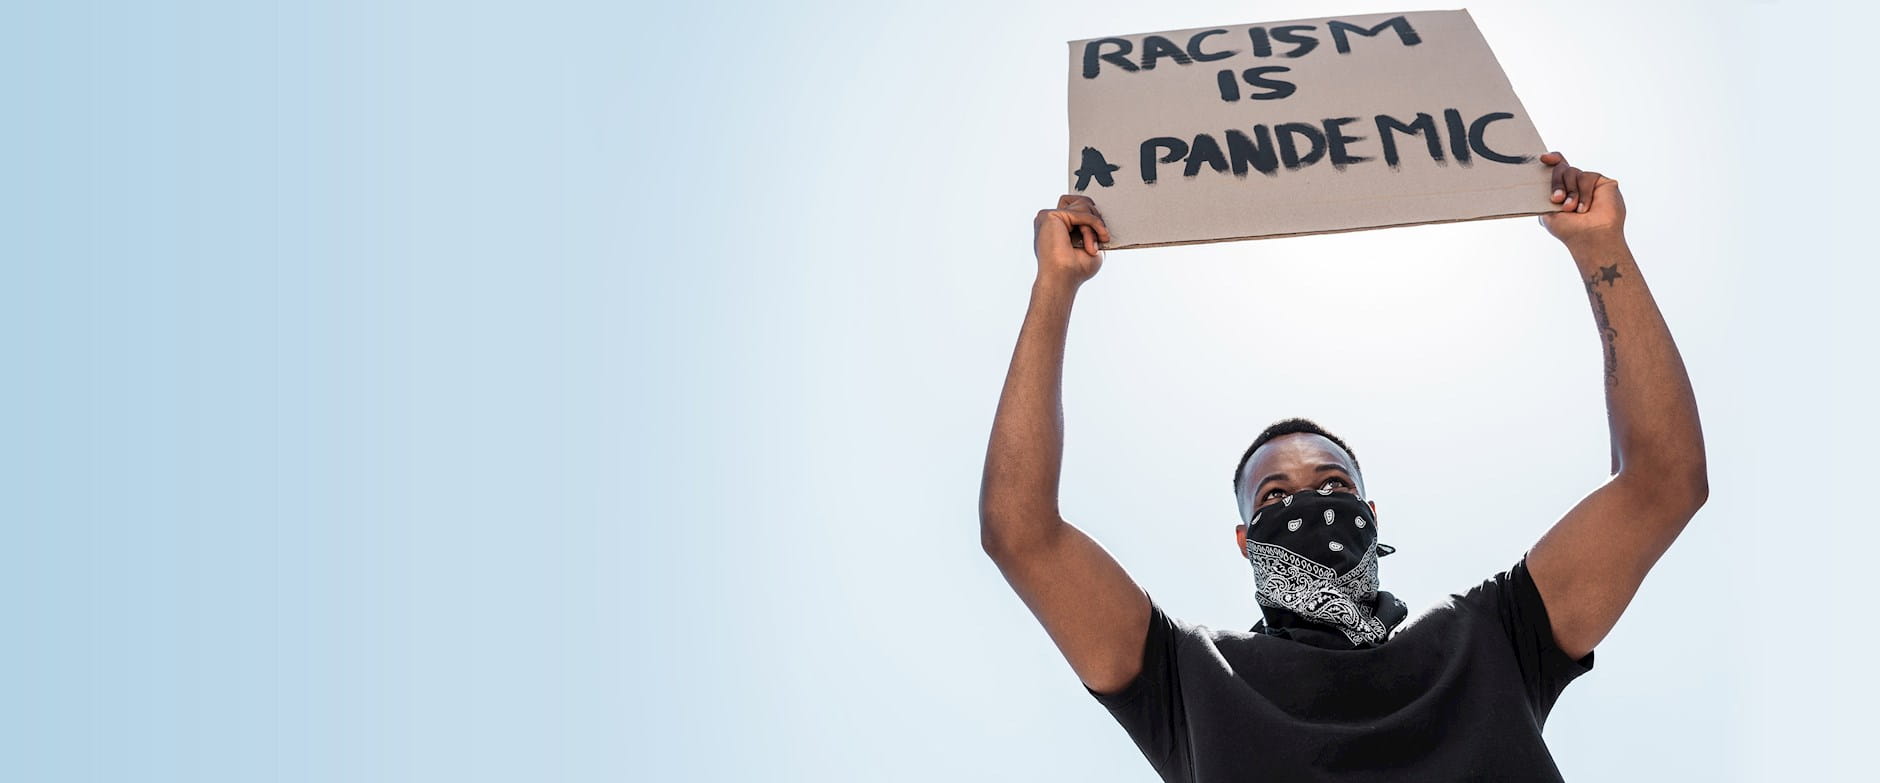 A masekd man at a rally holding a sign above his head that reads "Racism is a pandemic"